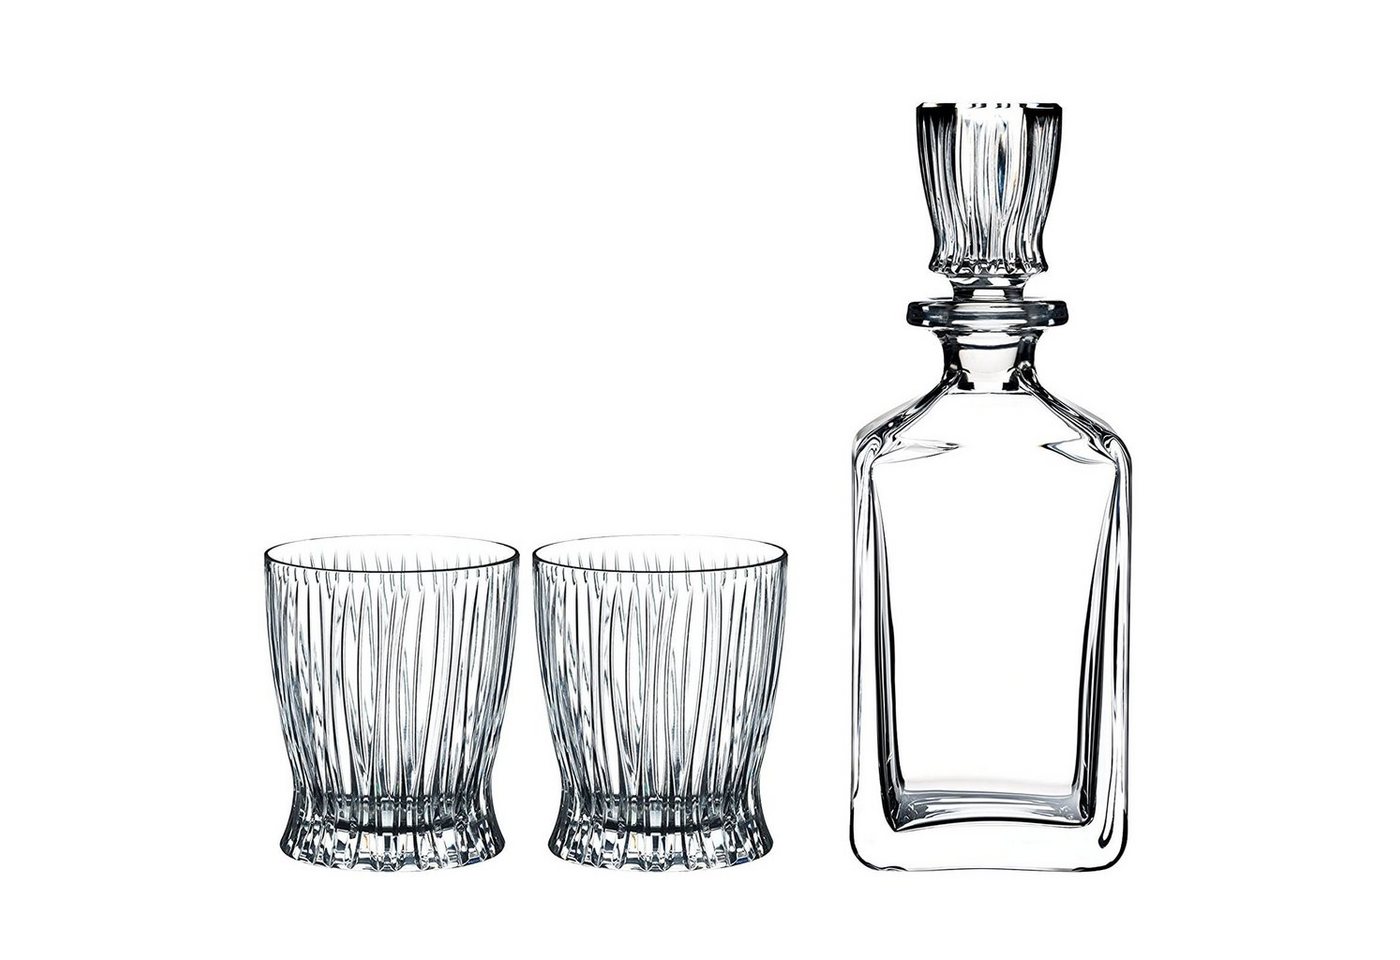 RIEDEL THE WINE GLASS COMPANY Glas Fire Whisky-Set, Kristallglas von RIEDEL THE WINE GLASS COMPANY